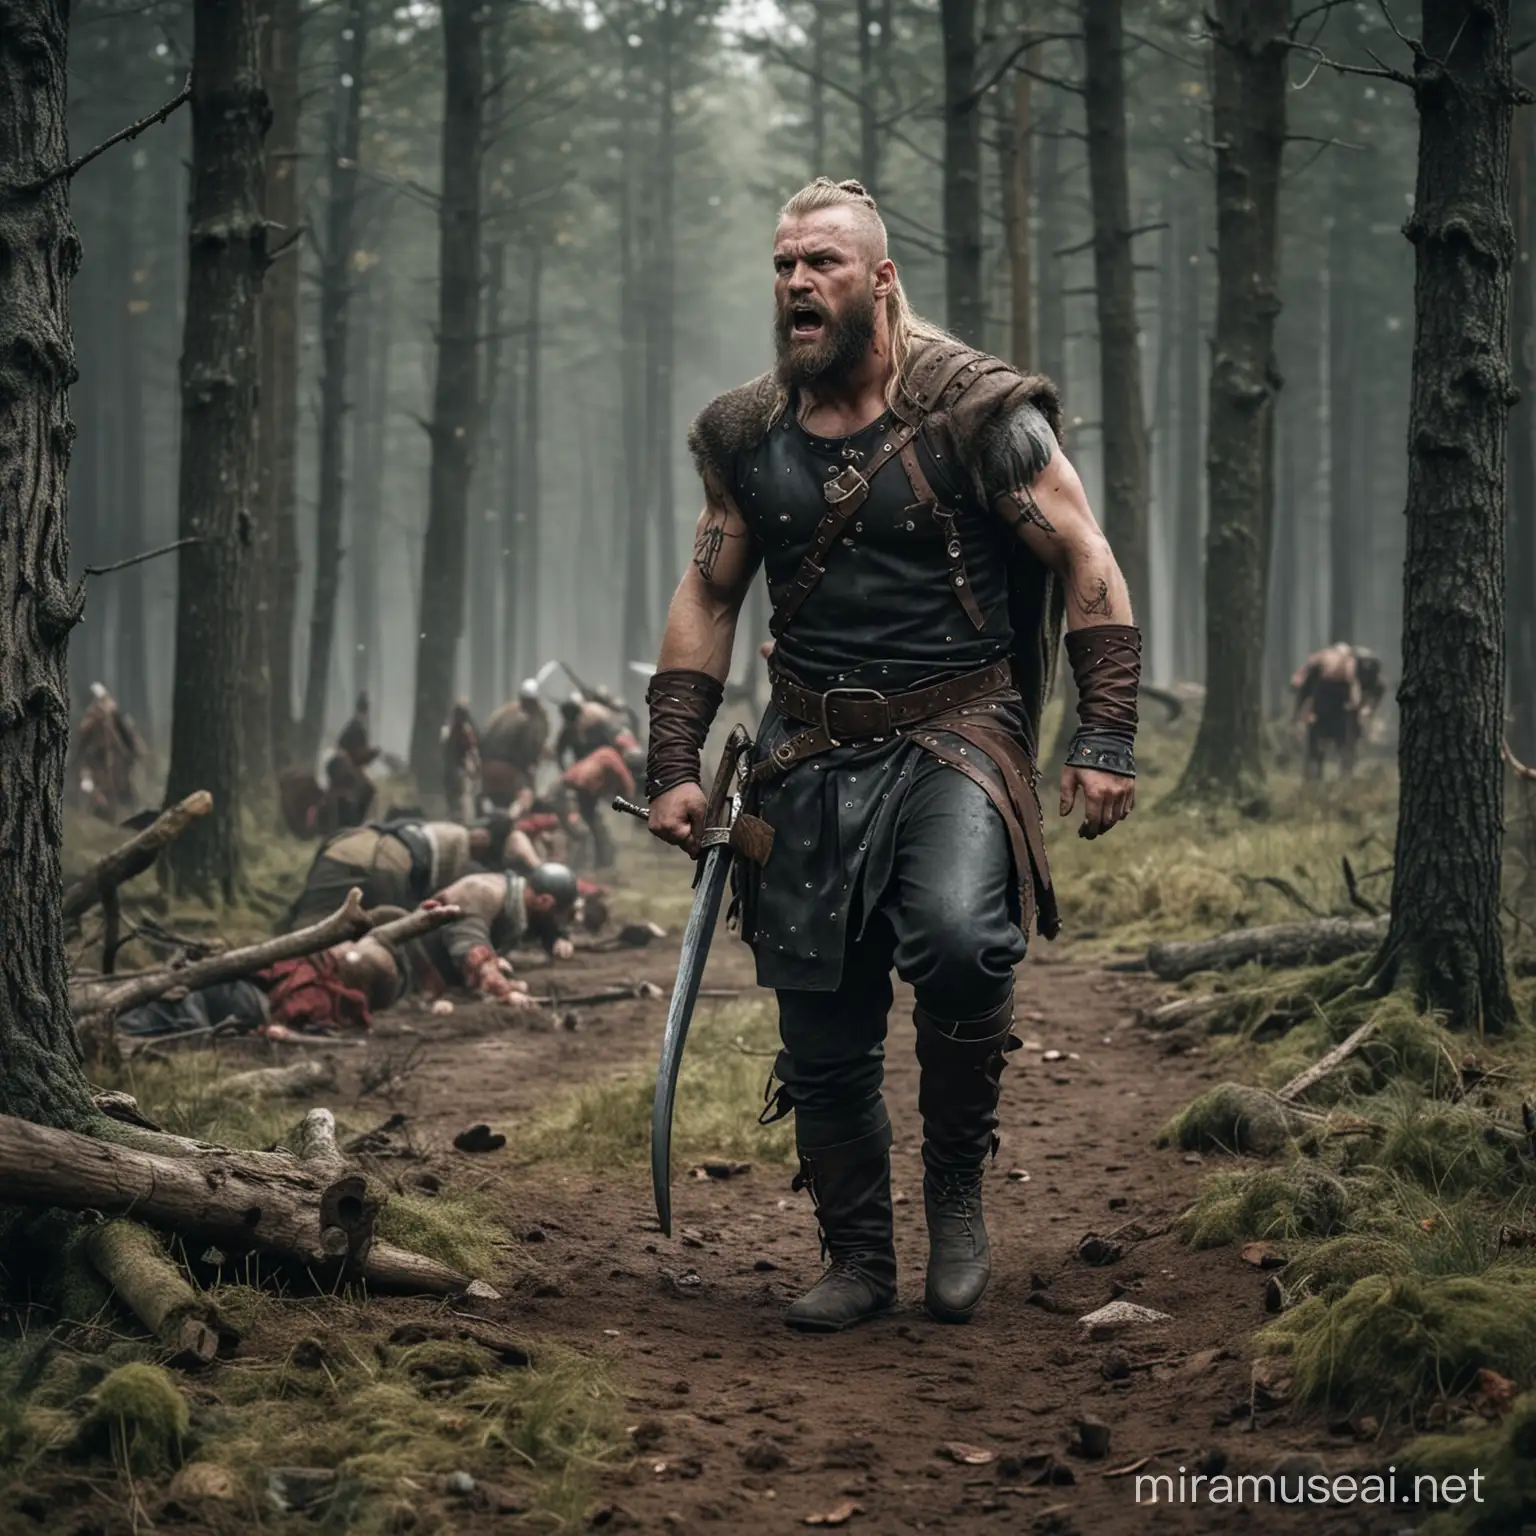 Fierce Viking Warrior Engaged in Forest Battle Amidst Fallen Comrades and Blood